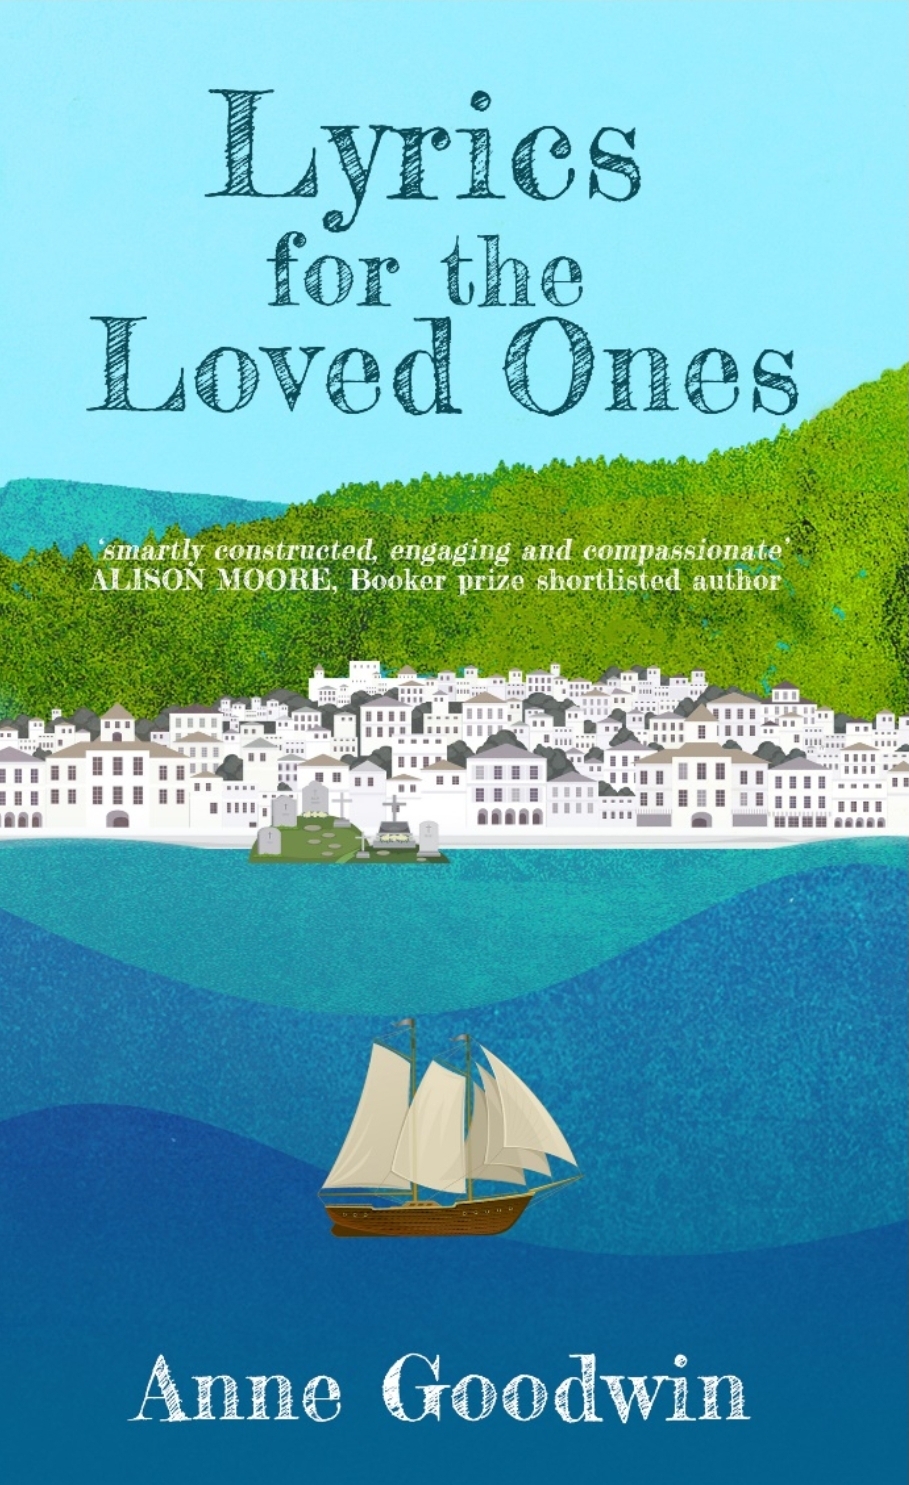 Lyrics For The Loved Ones by Anne Goodwin @Annecdotist #BookTwitter #PublicationDay #LyricsForTheLovedOnes